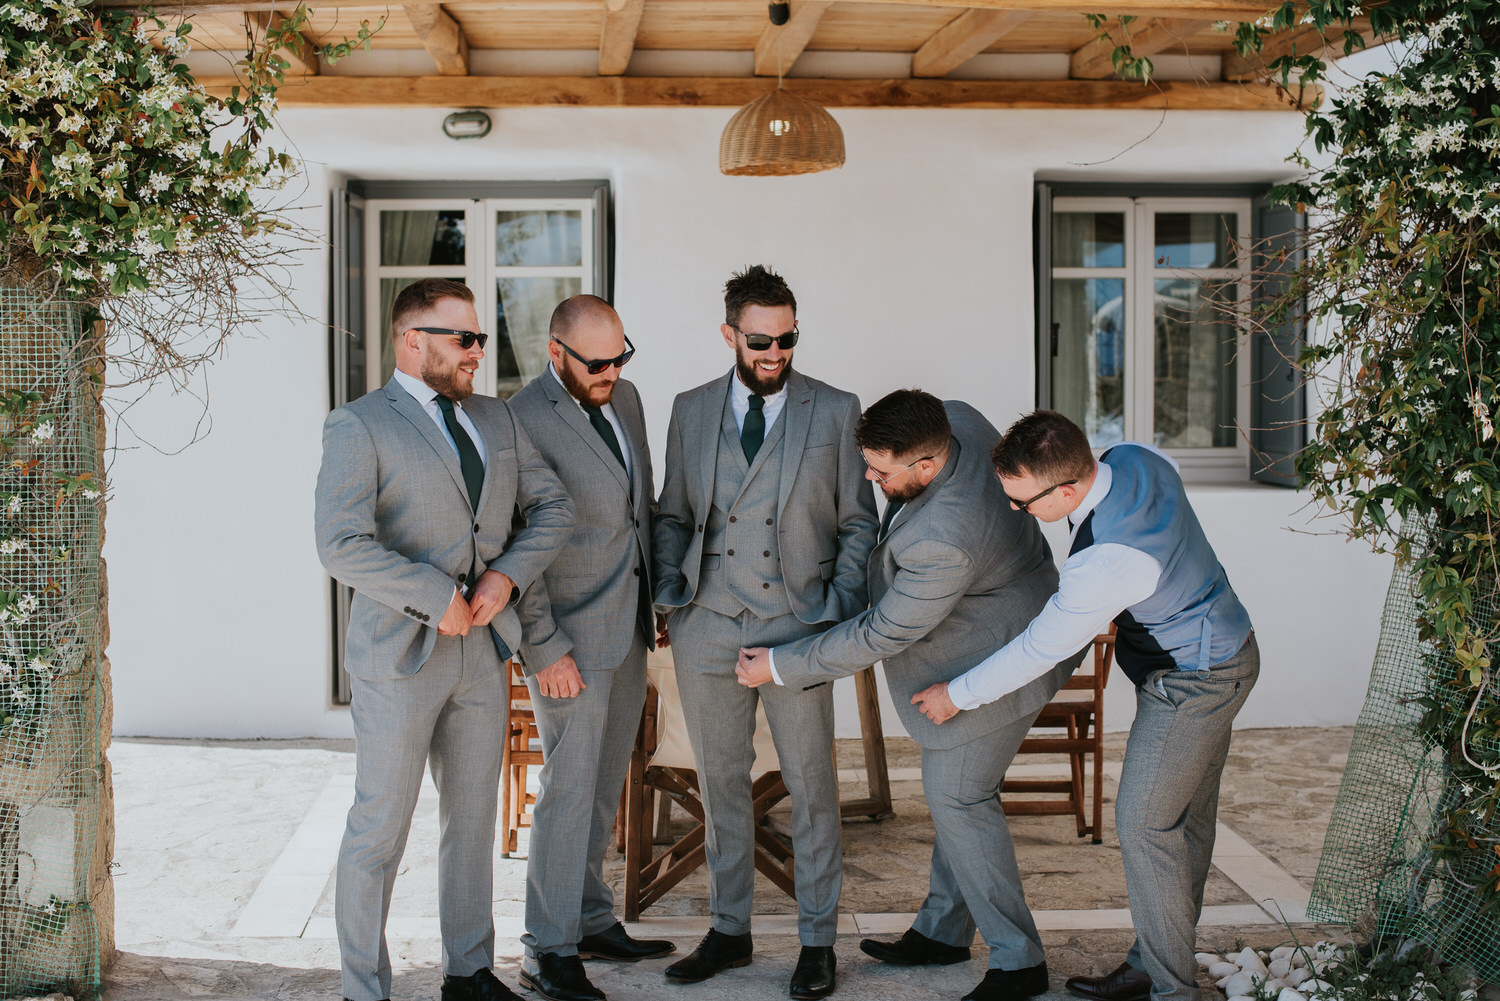 Mykonos wedding photographer: groom having a laugh with his men in front of the villa.